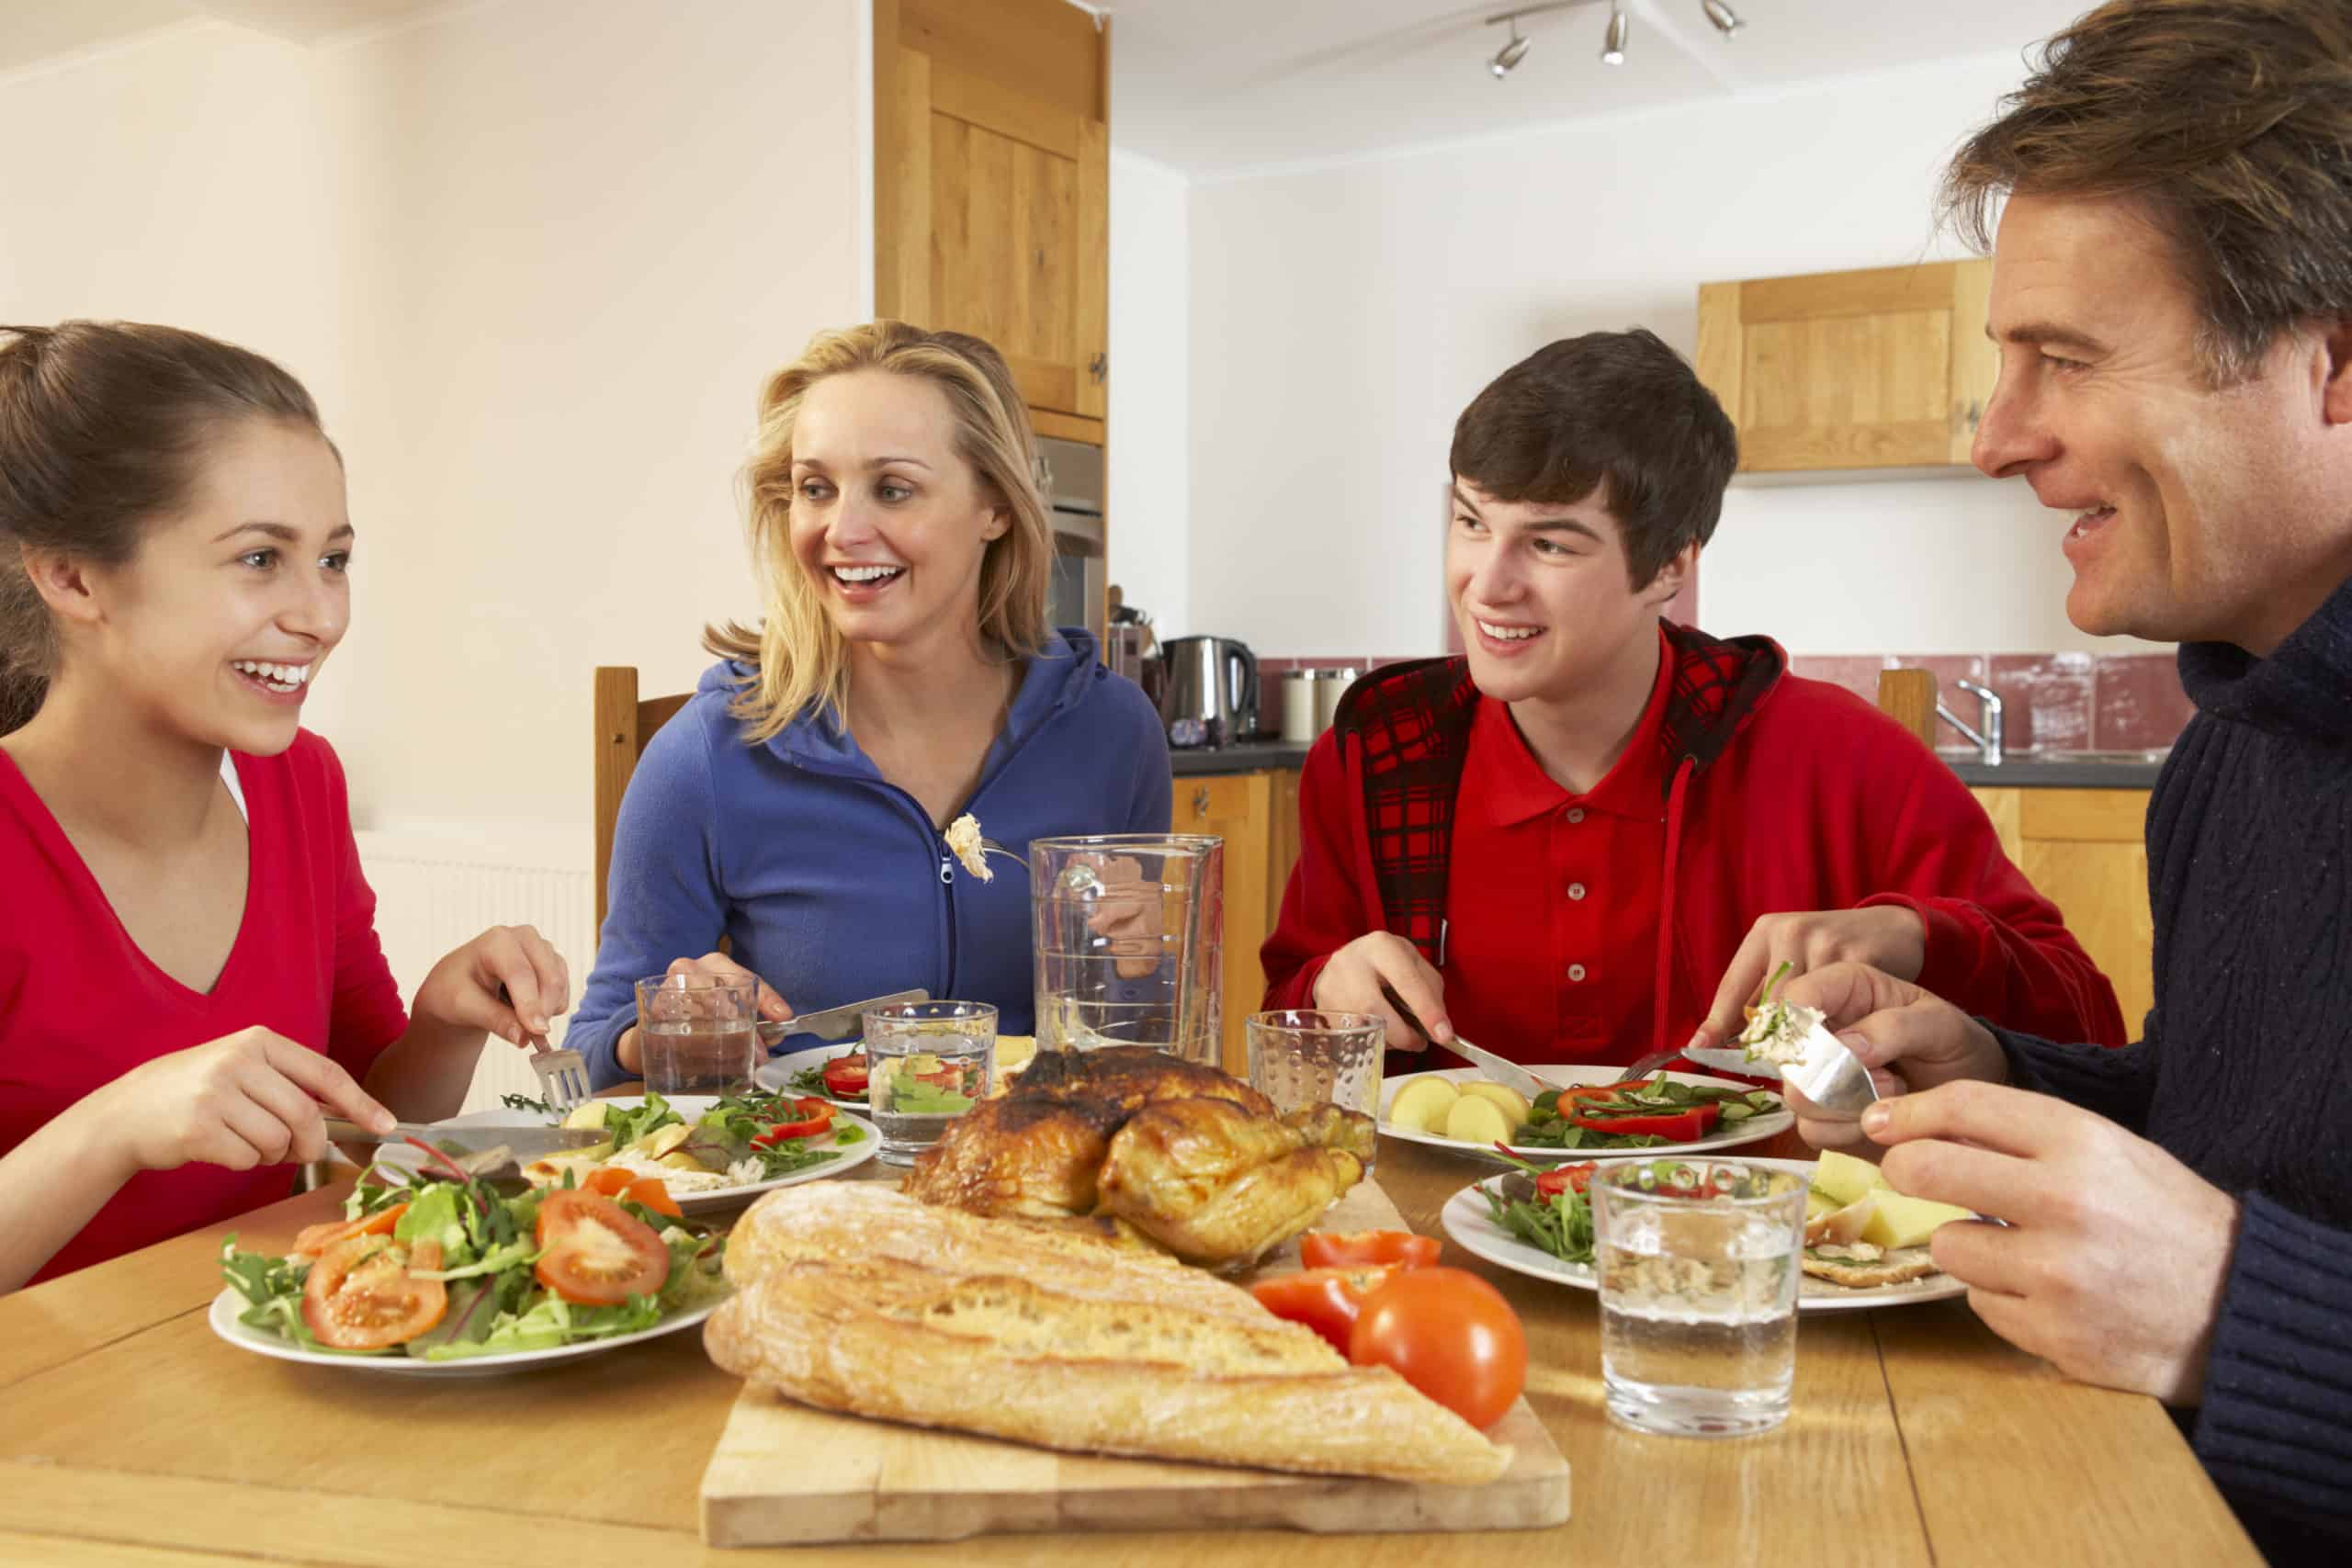 Teen girl and boy with family eating dinner at dining room table.